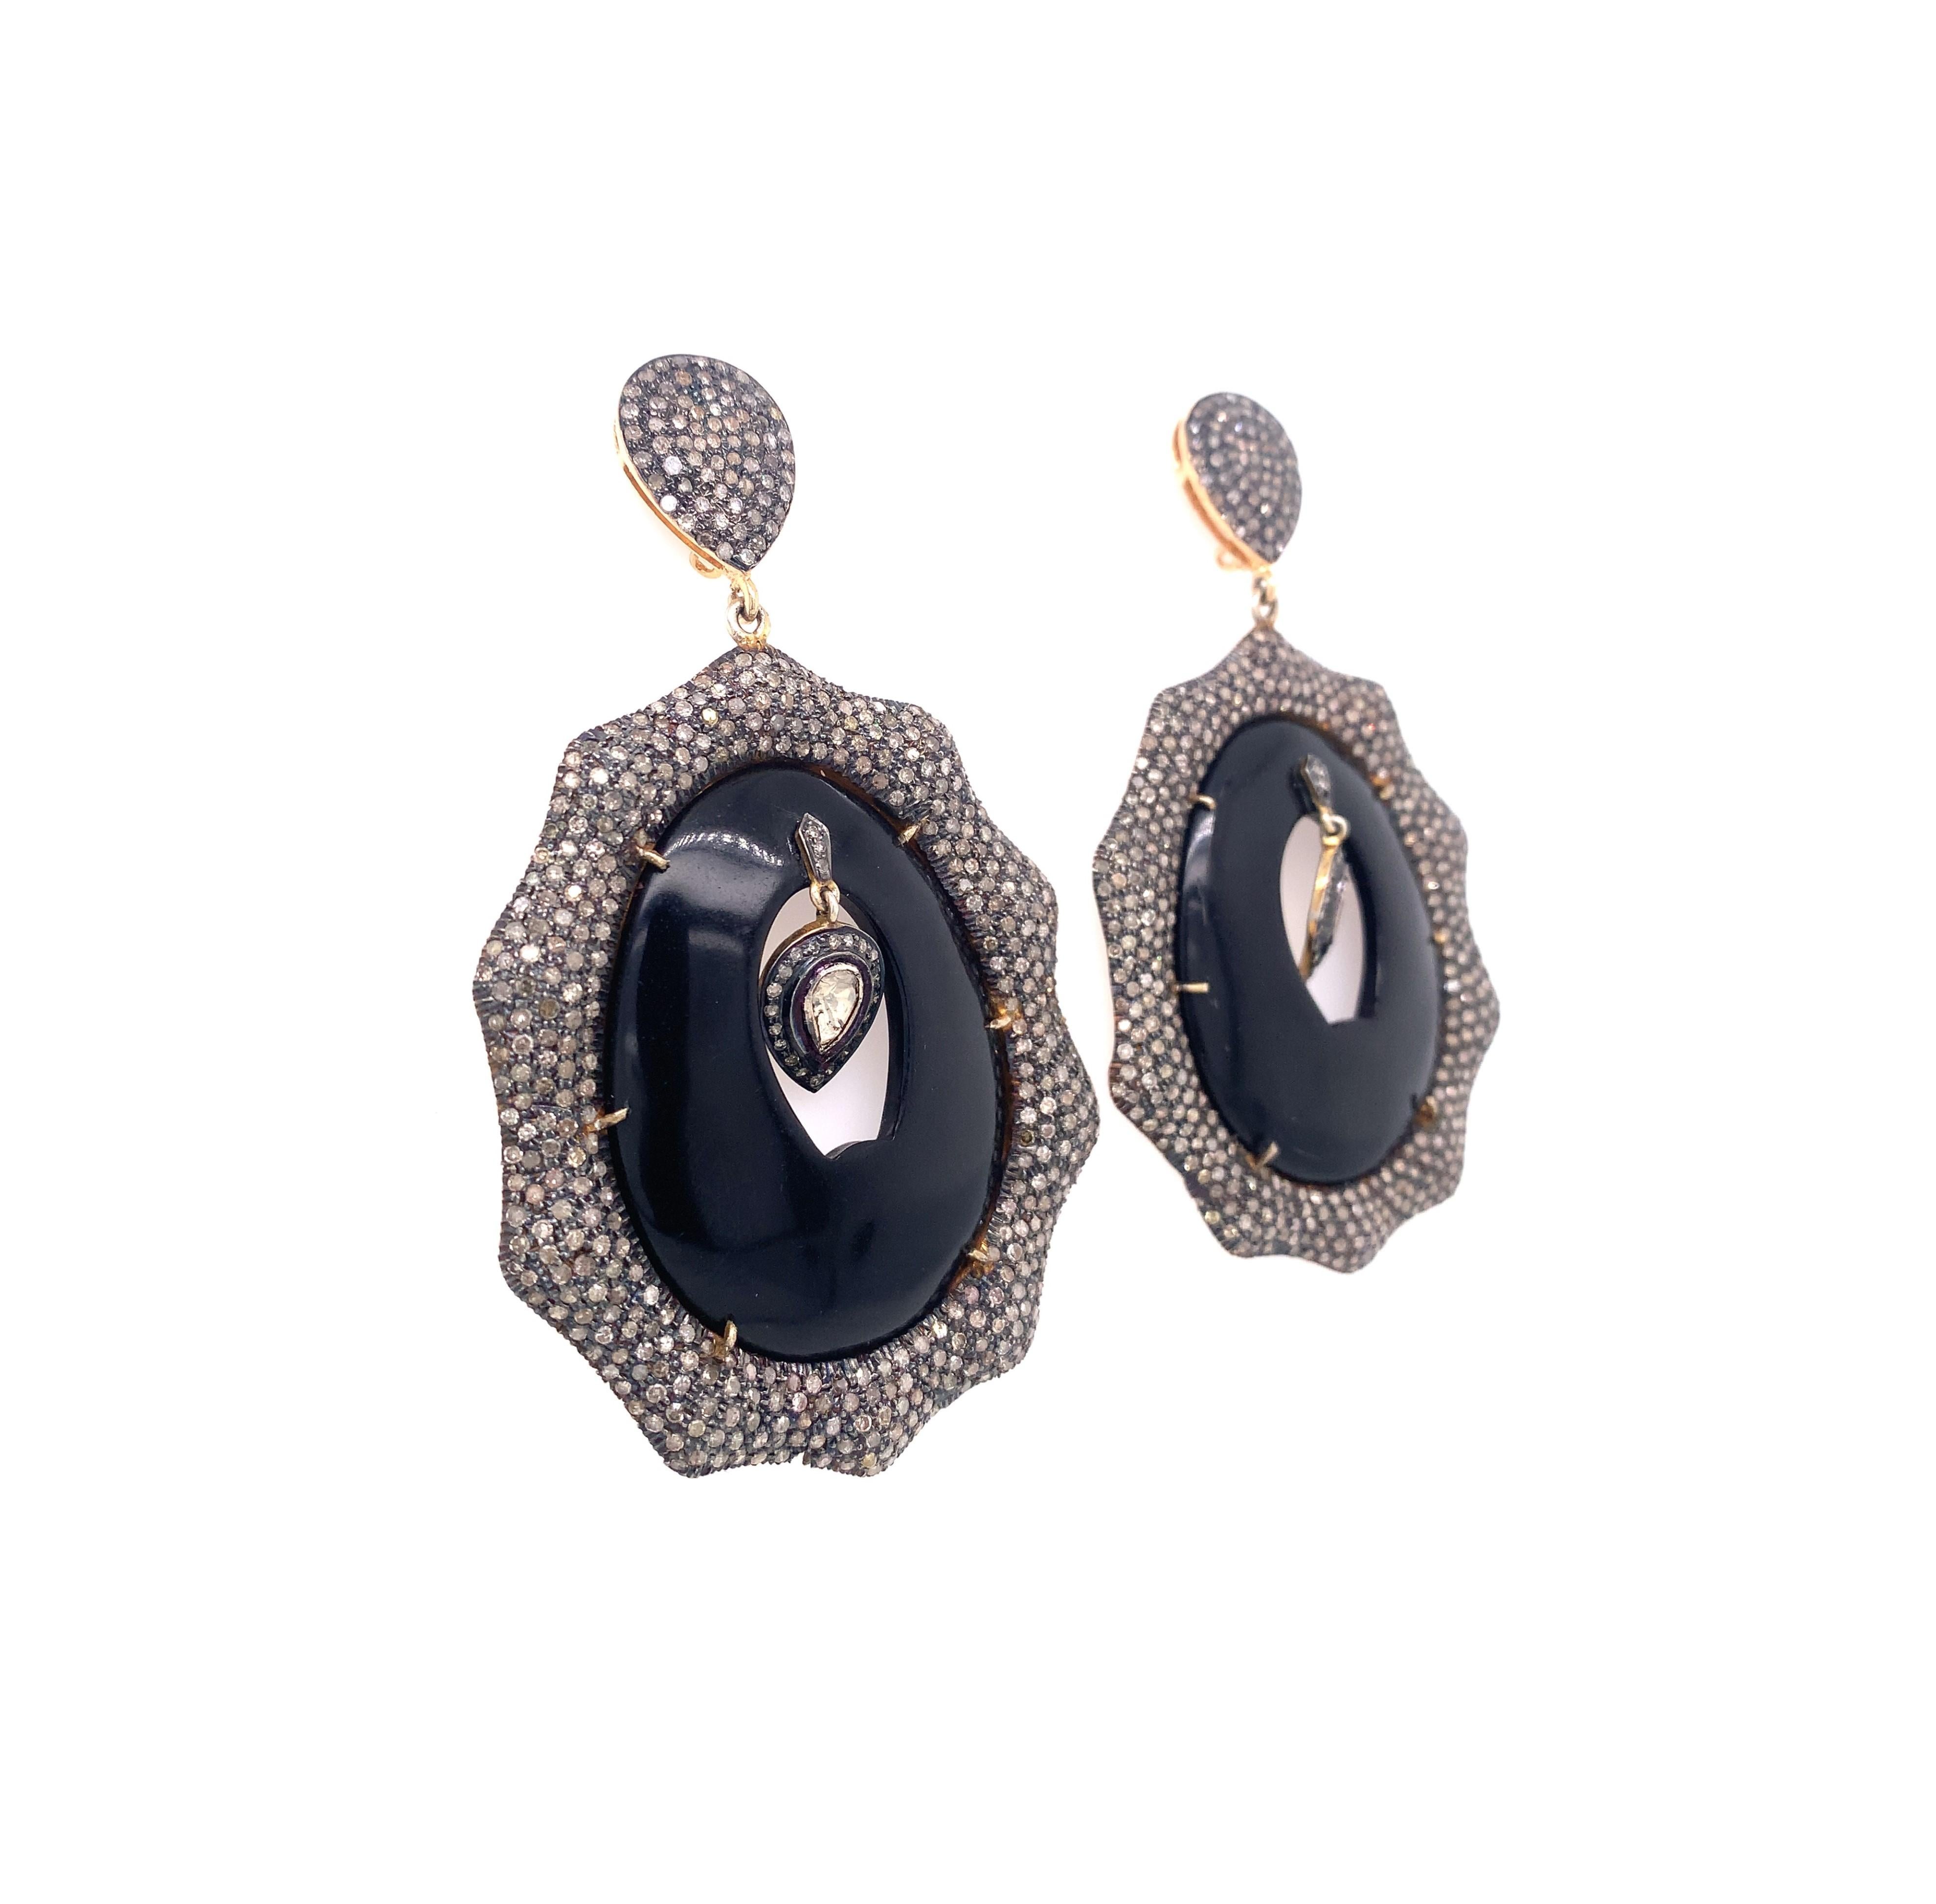 Rustic collection

Black Enamel with icy Diamonds statement earring set in silver and 14k yellow gold plating.

Diamond: 11.71ct total weight.